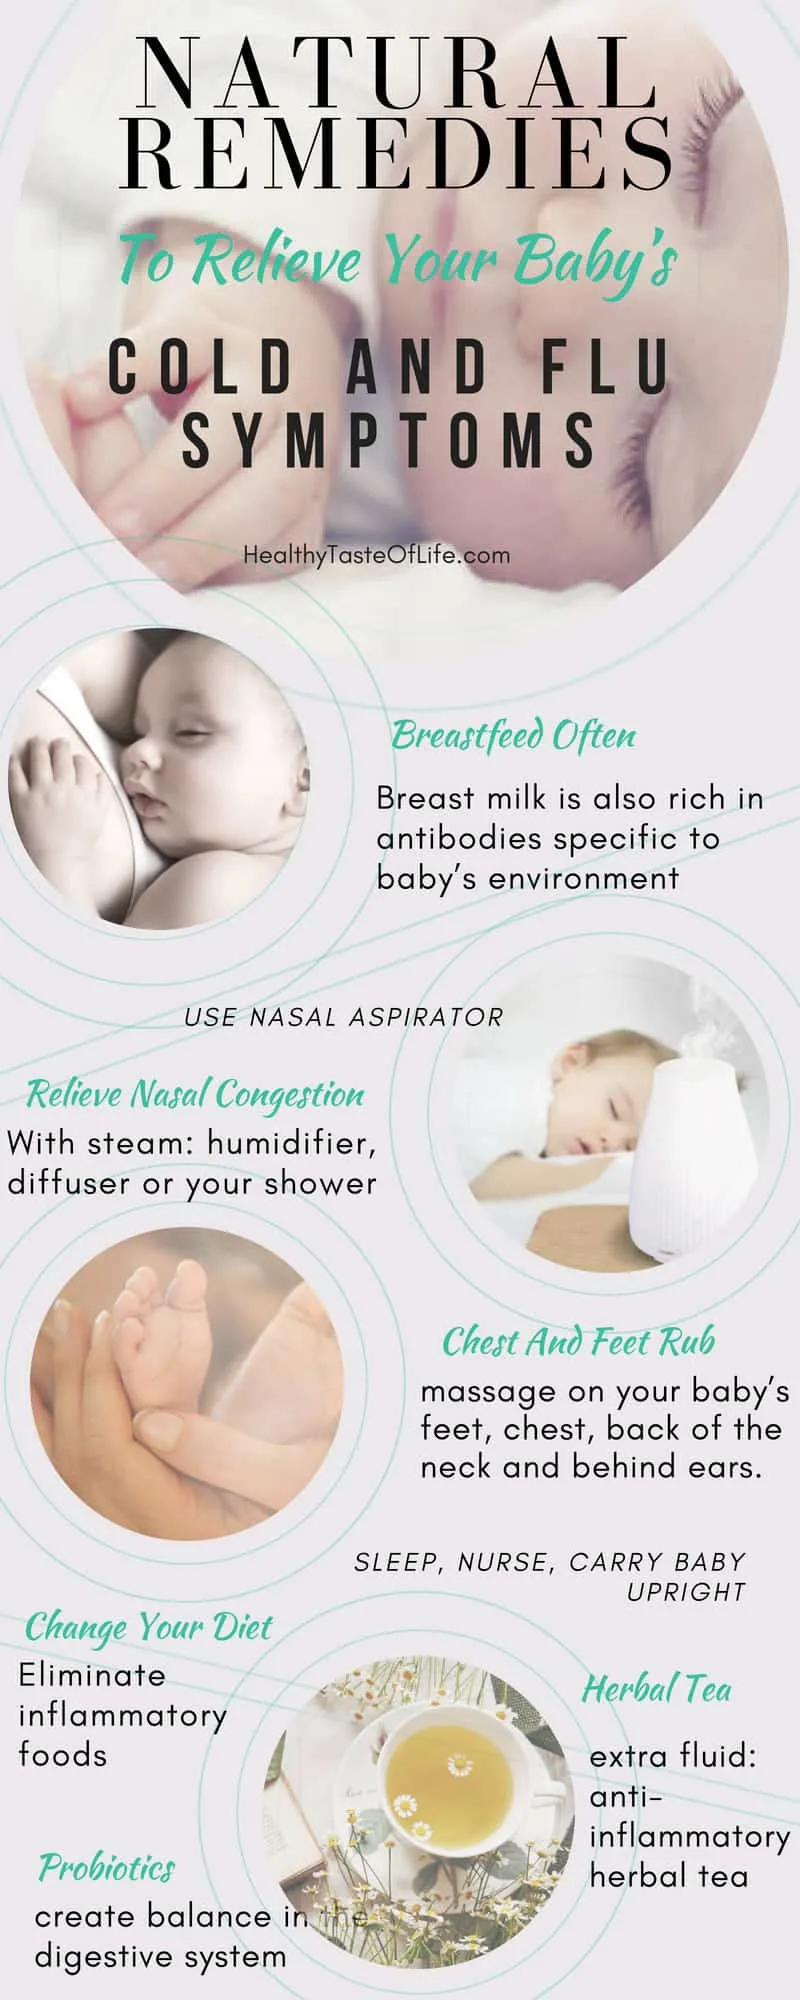 https://healthytasteoflife.com/wp-content/uploads/2017/08/natural-remedies-To-relieve-your-babys-cold-and-flu-symptoms.jpg.webp